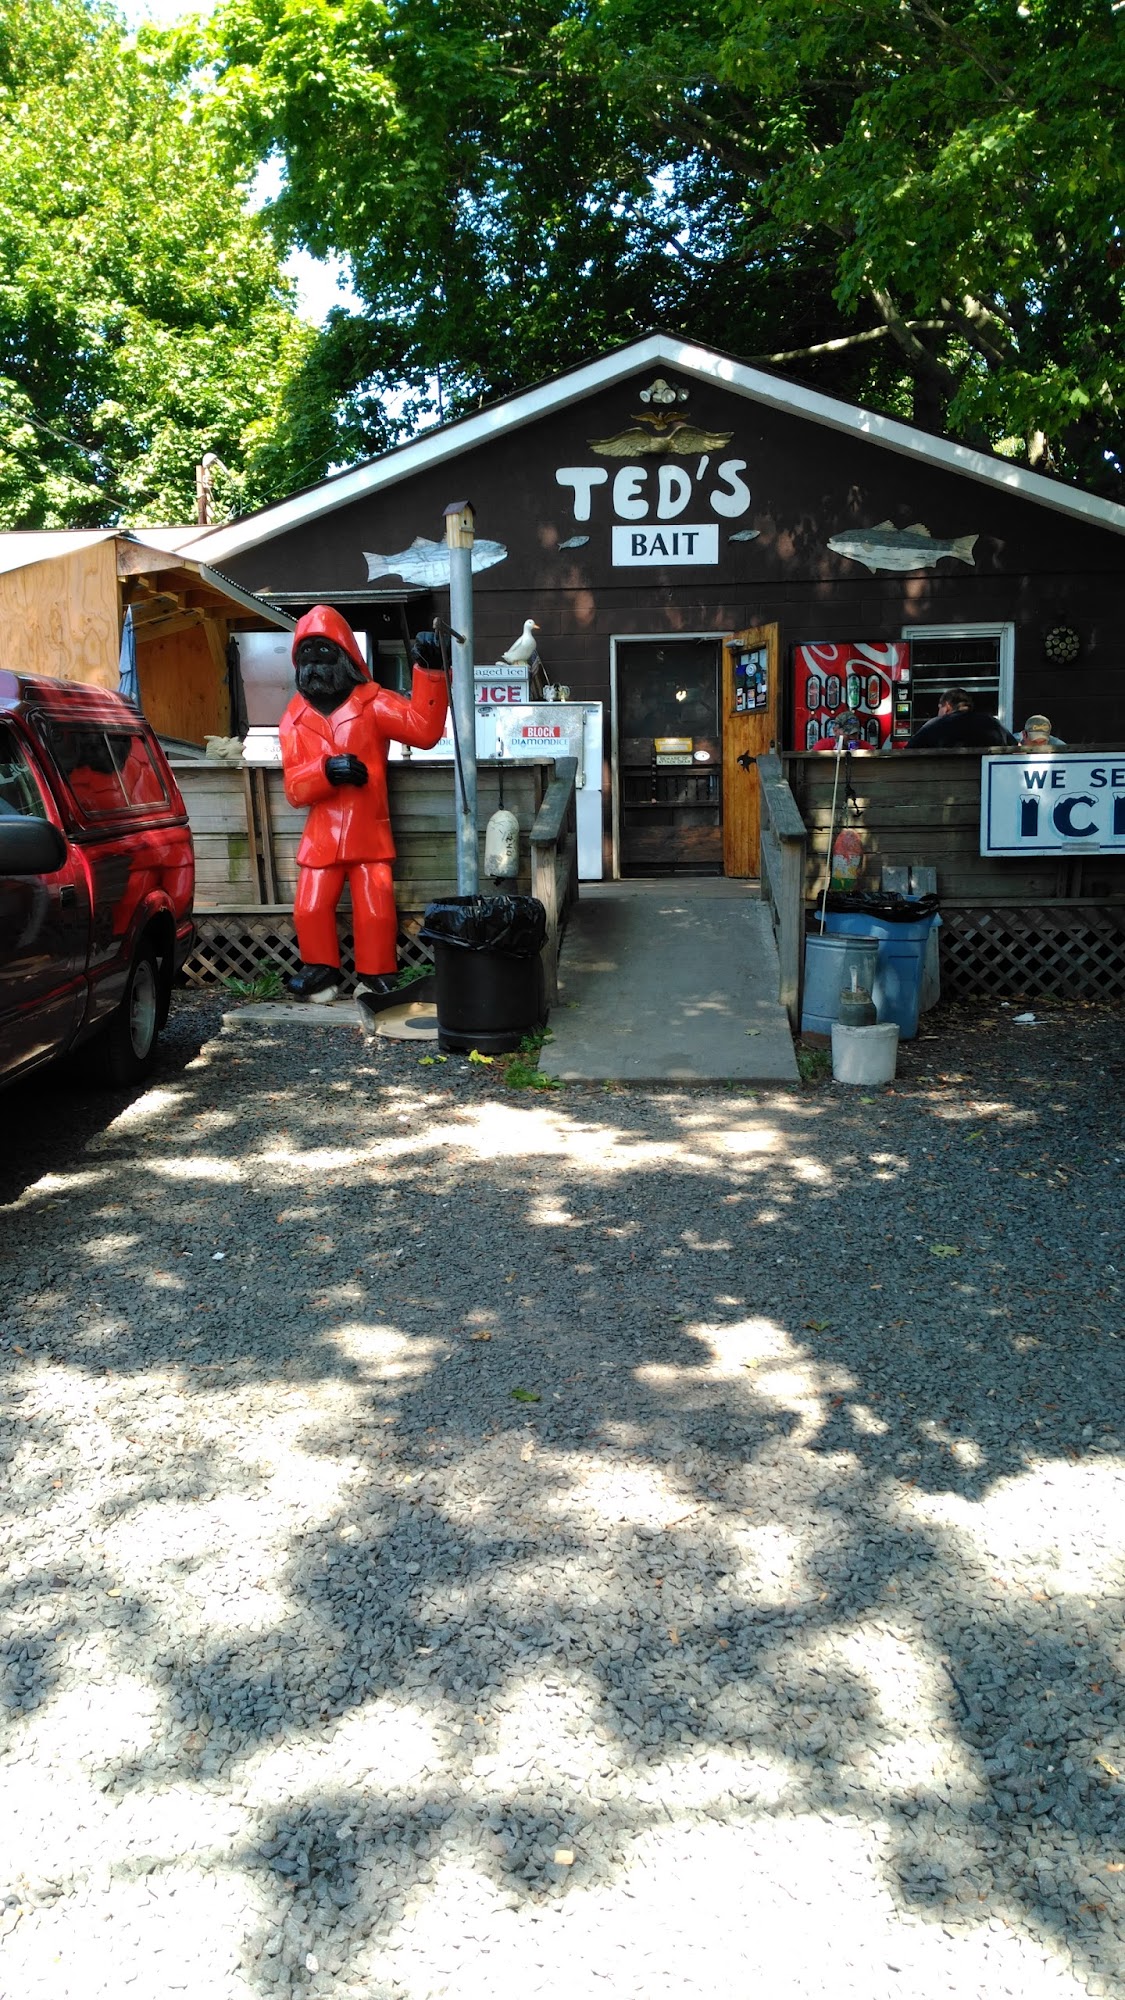 Ted's Bait & Tackle